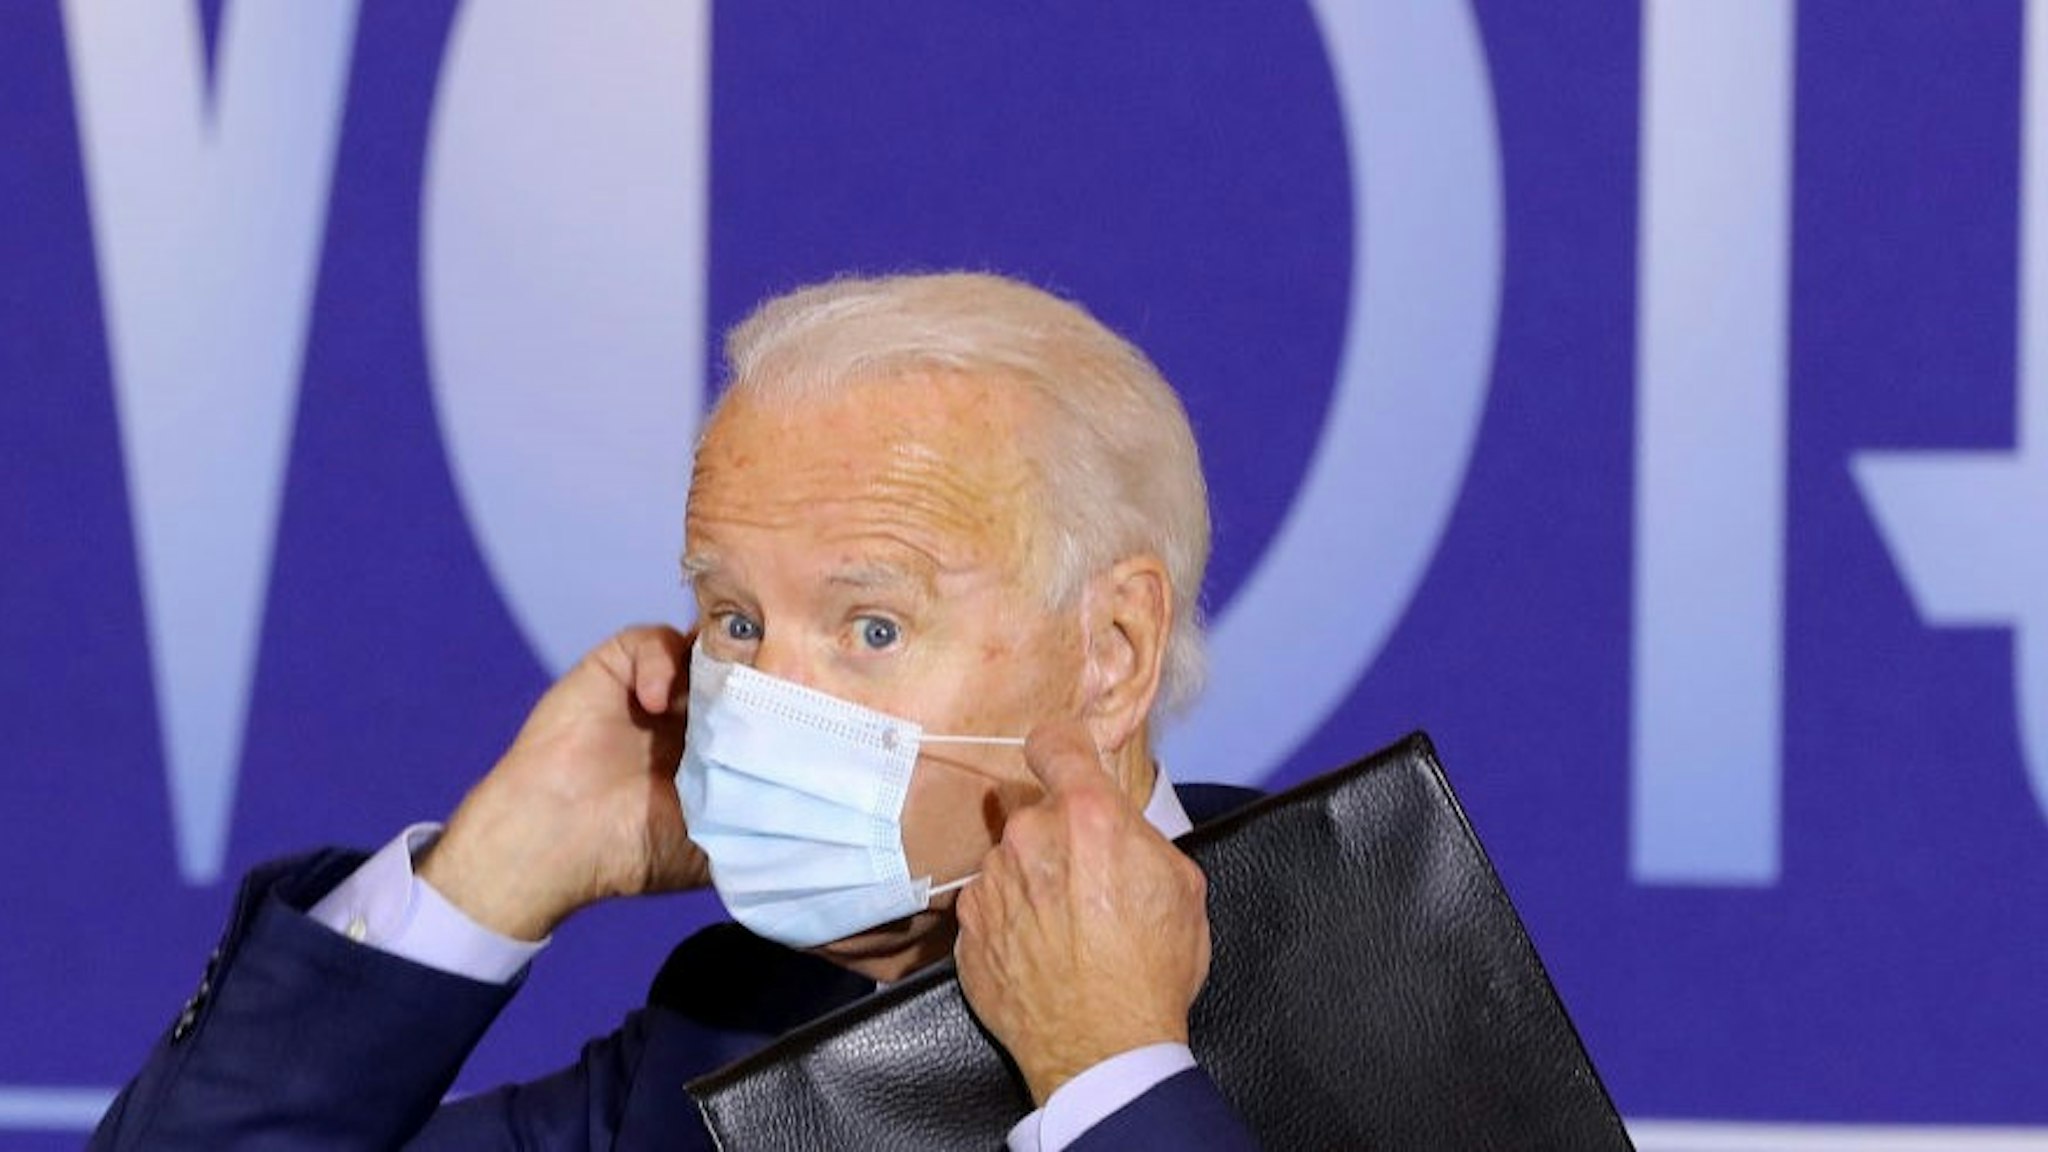 CINCINNATI, OH - OCTOBER 12: Democratic presidential nominee Joe Biden replaces his face mask after delivering remarks during a voter-mobilization event at the Cincinnati Museum Center at Union Terminal October 12, 2020 in Cincinnati, Ohio. With 21 days until the election, Biden is campaigning in Toledo and Cincinnati. (Photo by